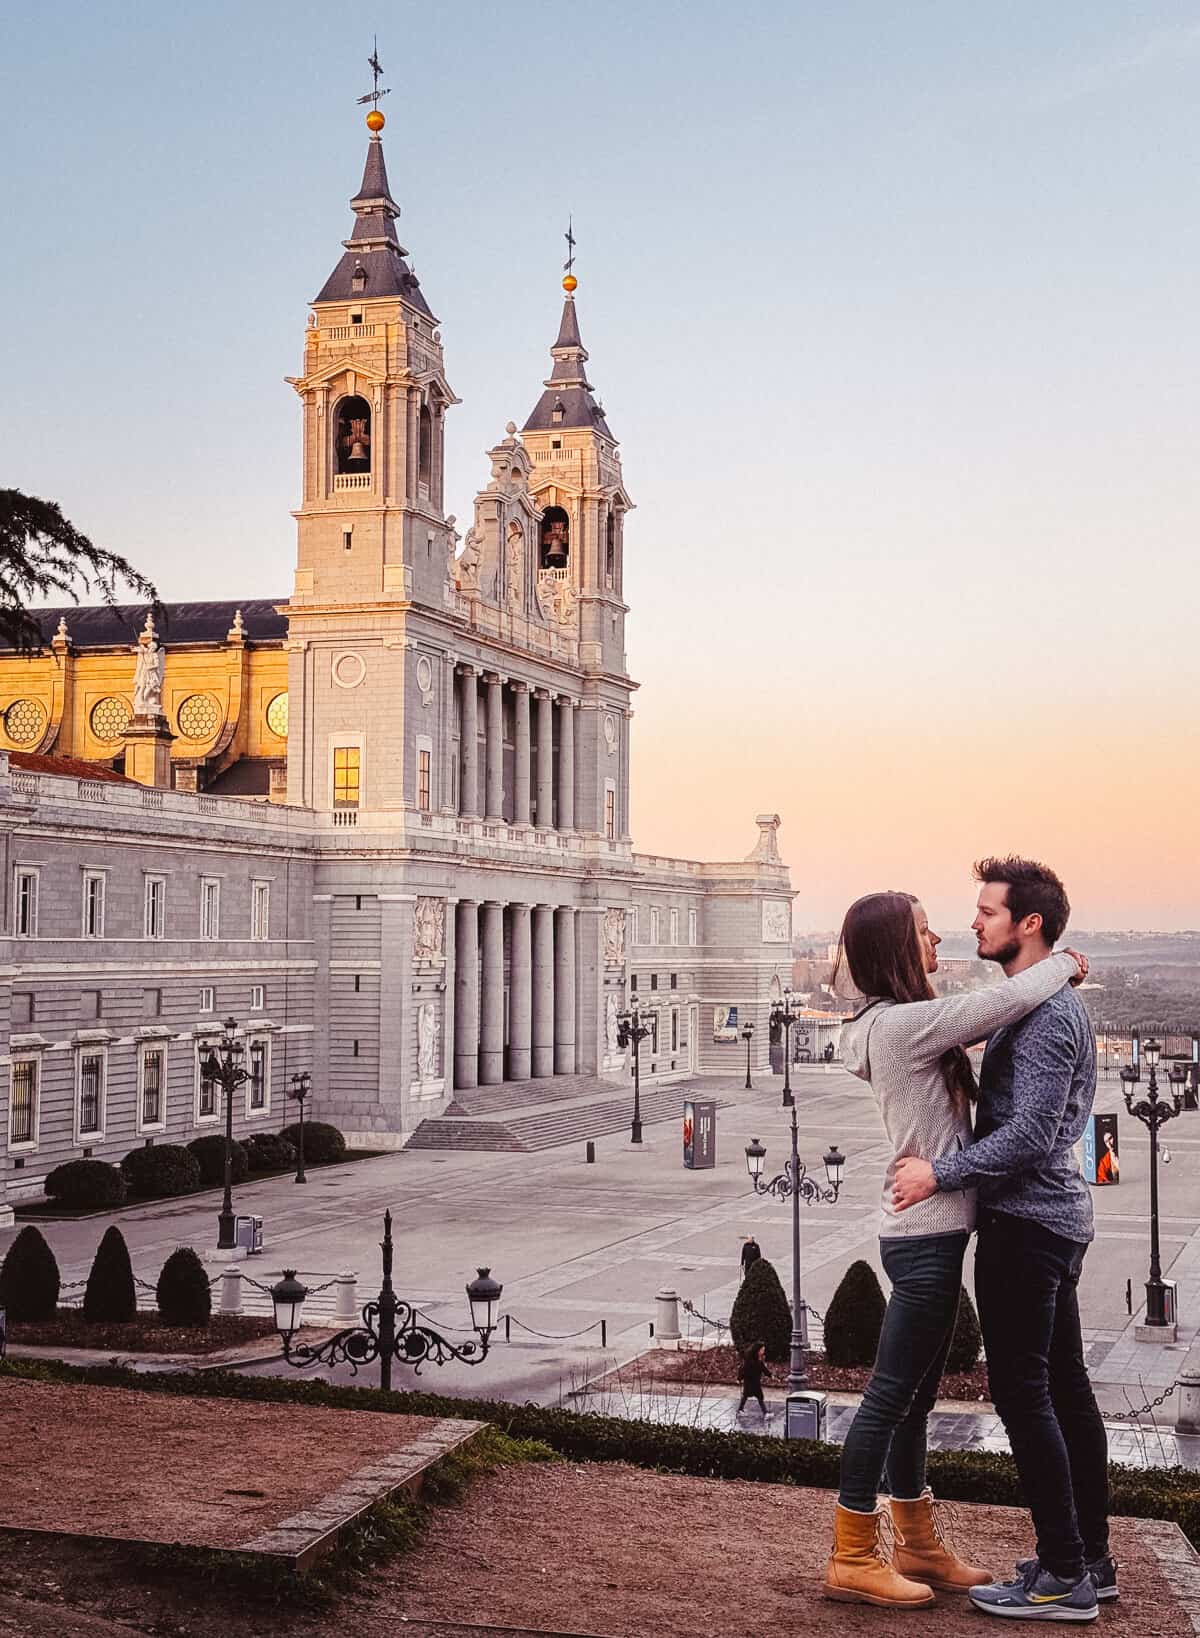 An intimate moment between a couple in front of the Almudena Cathedral in Madrid at dusk, with the historic structure illuminated, providing a majestic setting for a romantic scene.